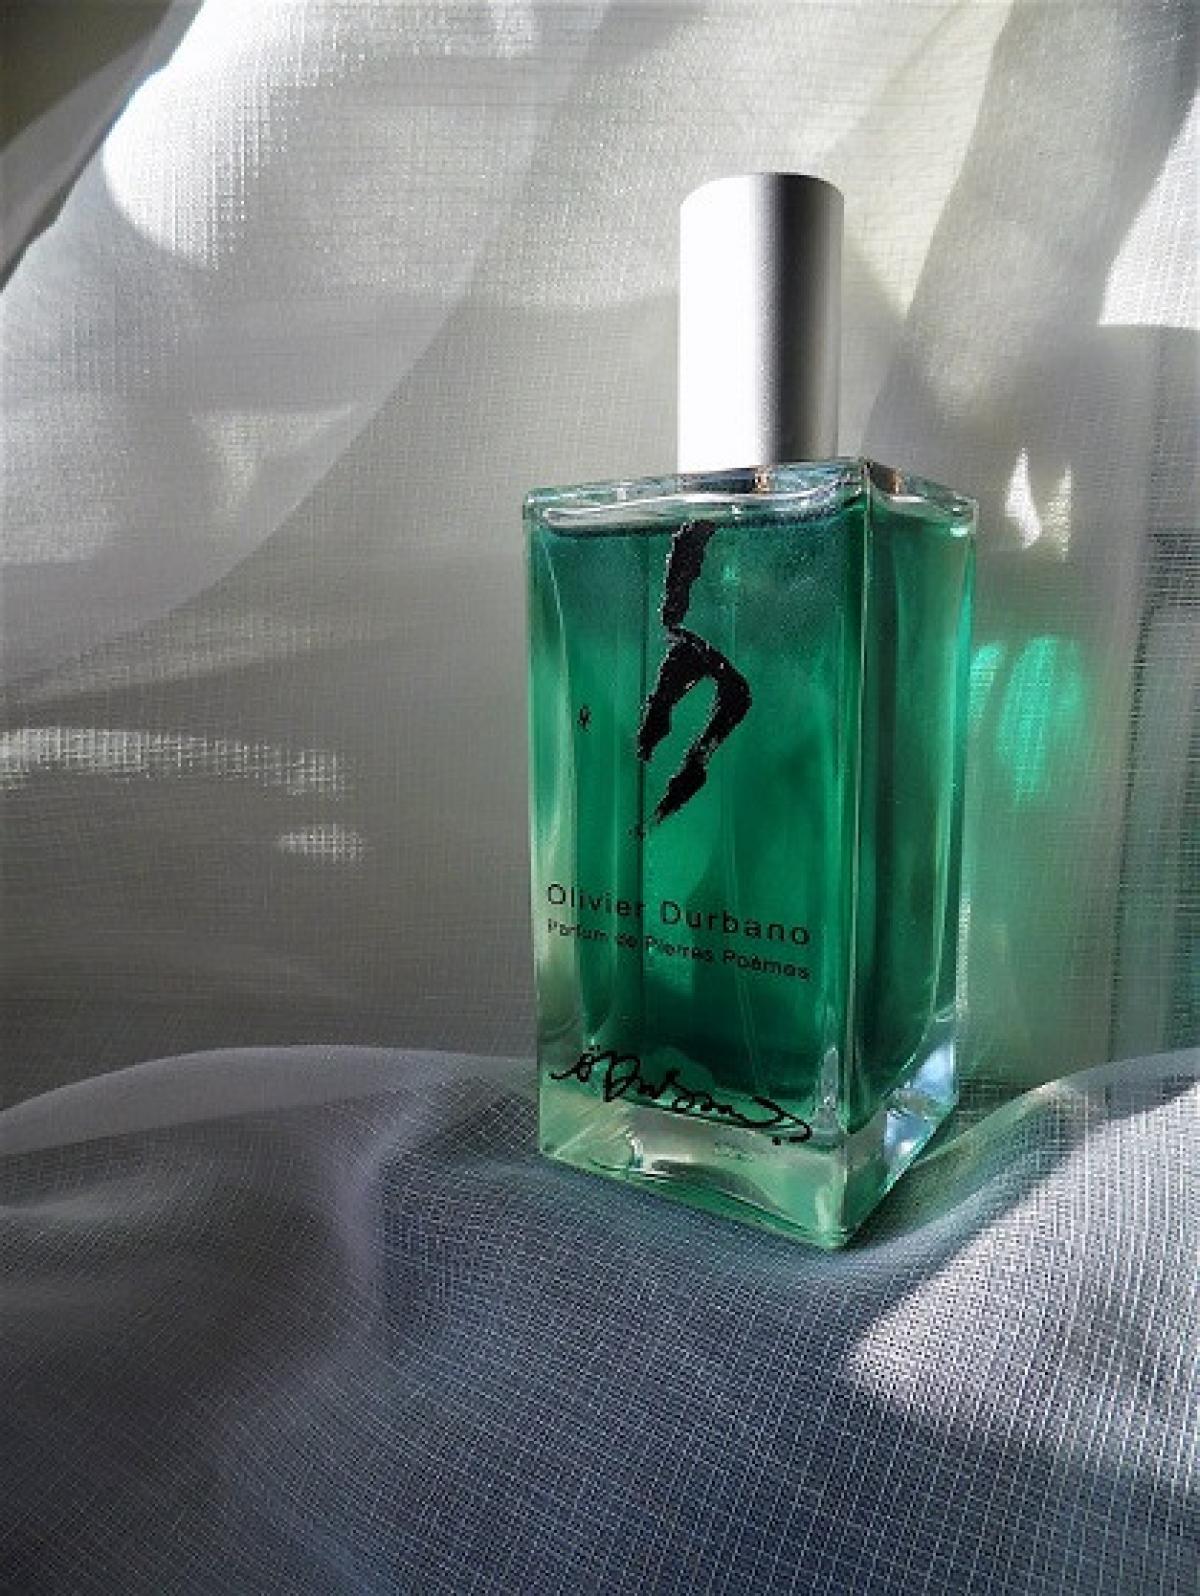 Jade Olivier Durbano perfume - a fragrance for women and men 2008